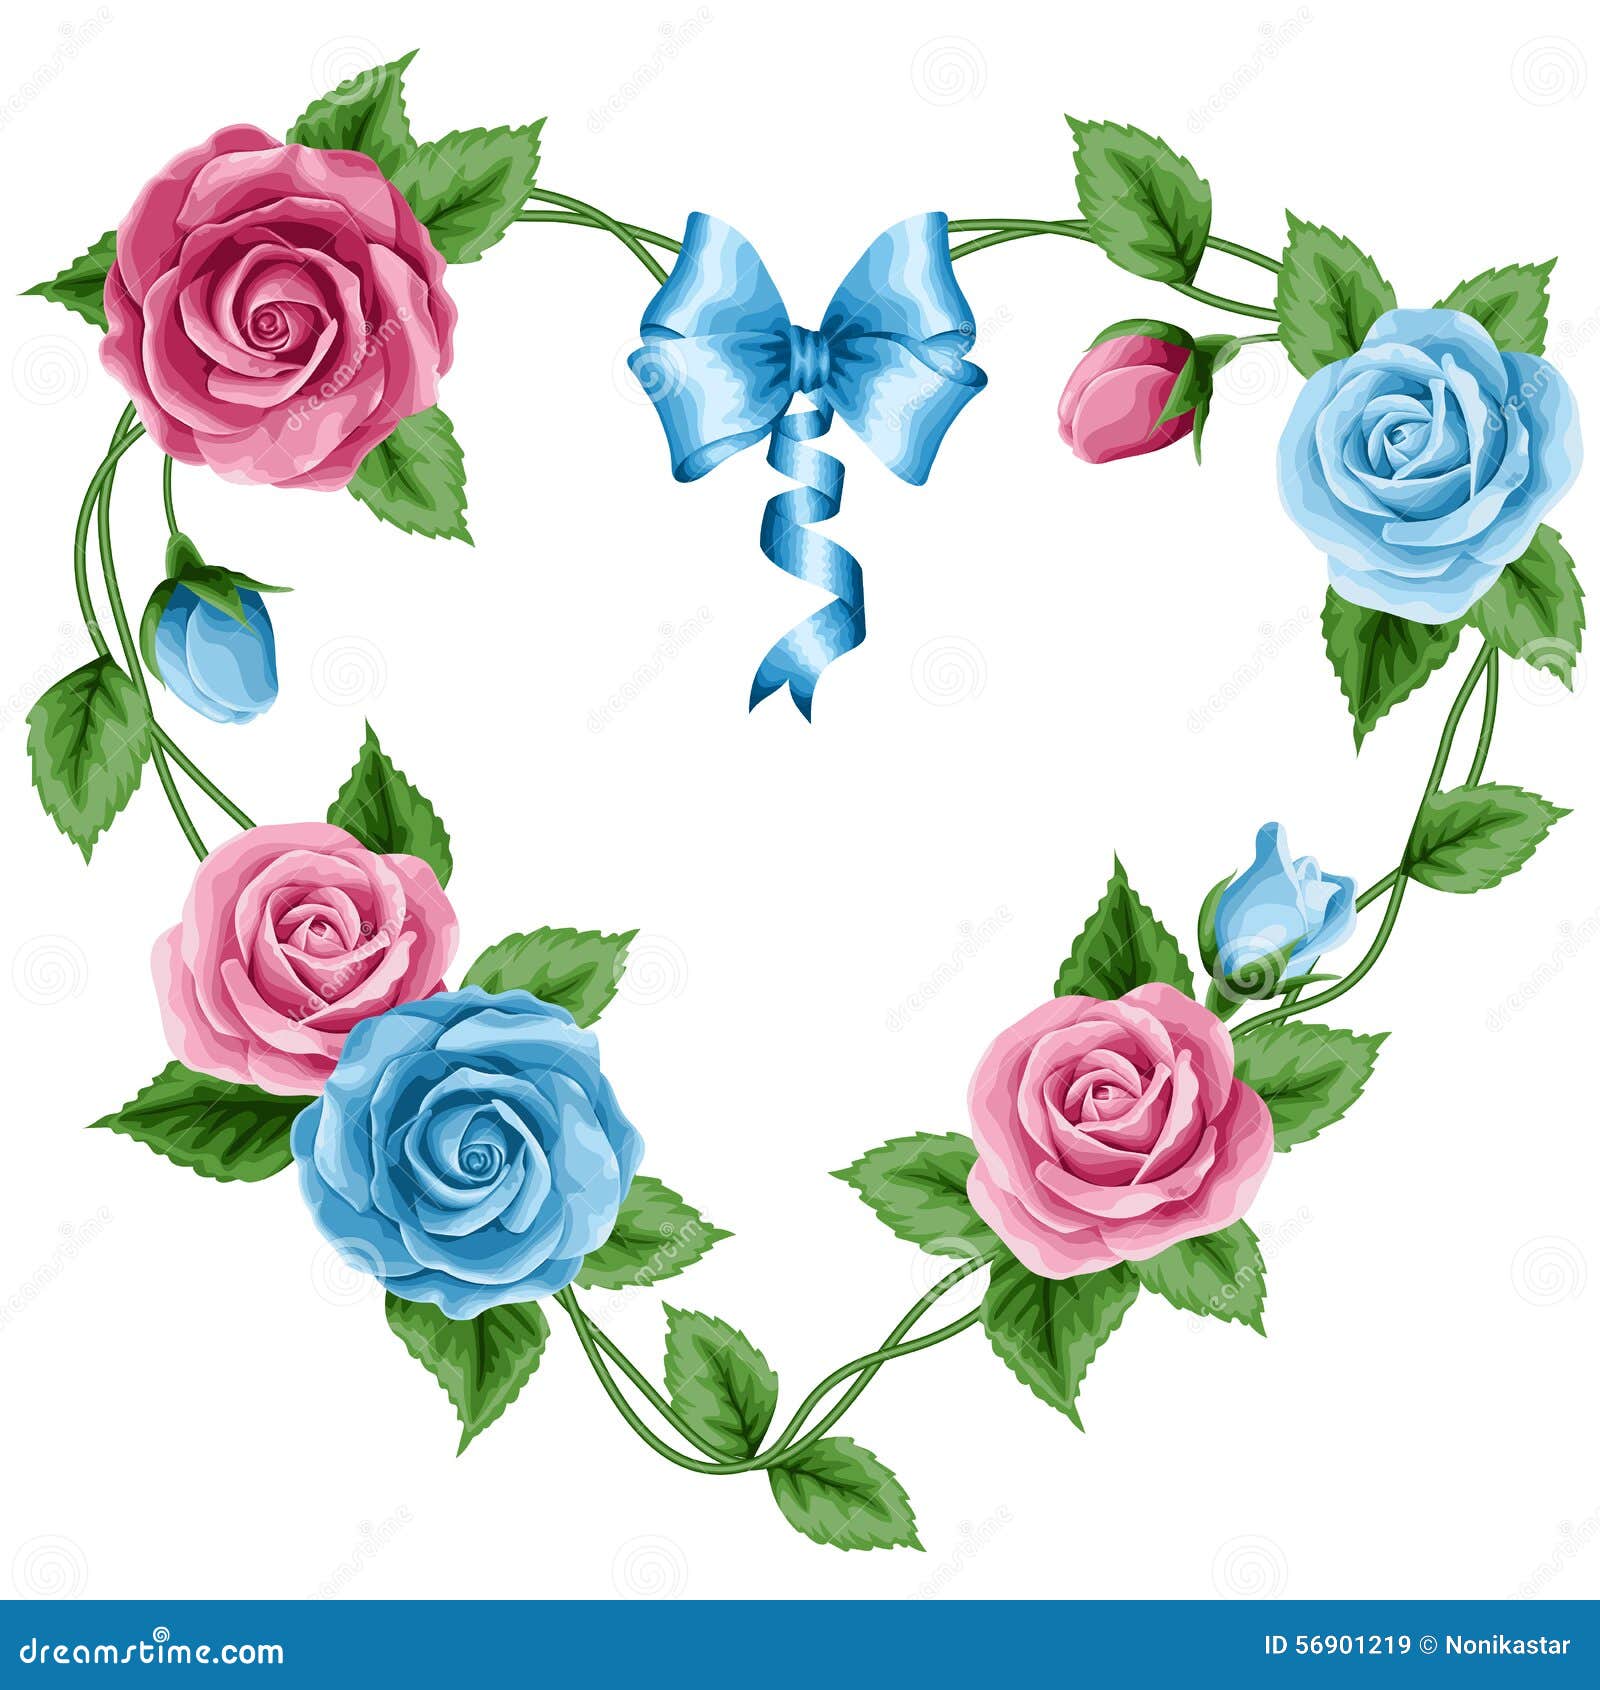 Wreath of roses stock vector. Illustration of garland - 56901219